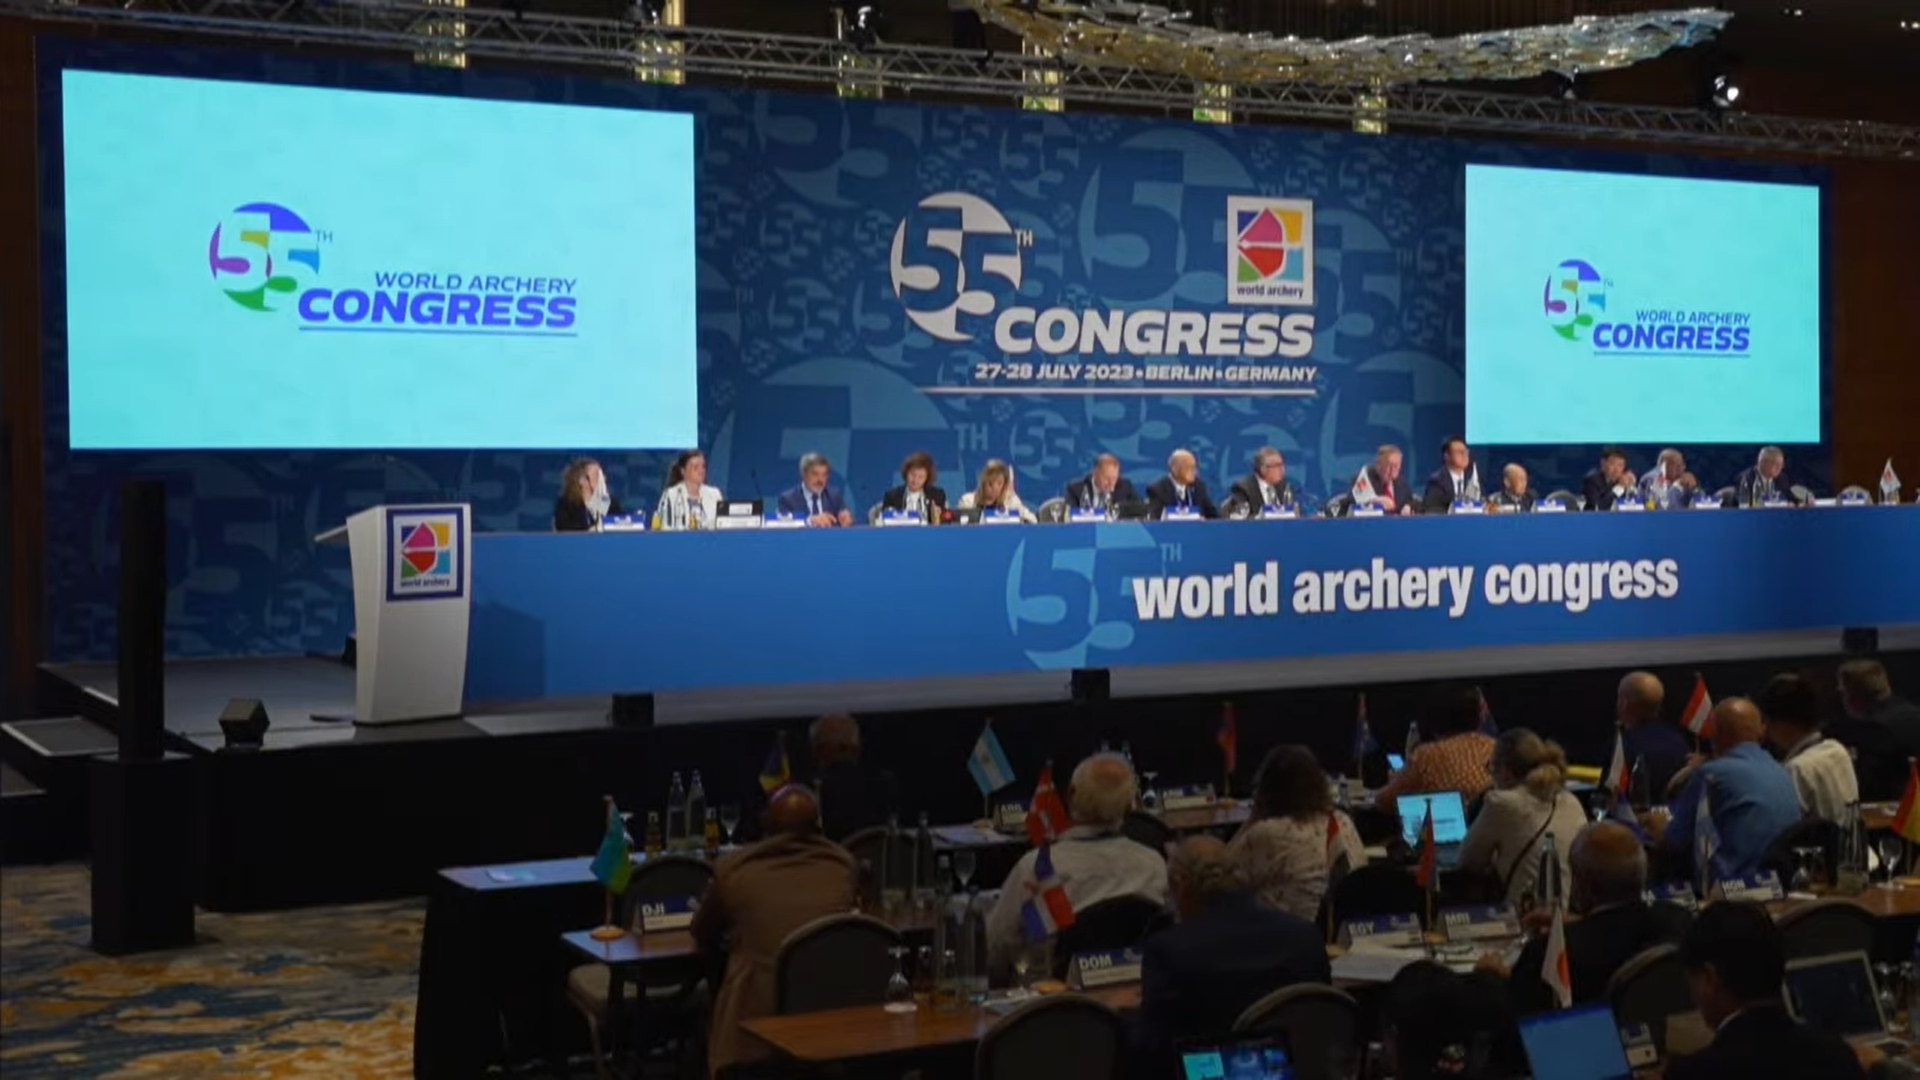 The two-day World Archery Congress preceded the World Archery Championships in Berlin set to start on Monday ©World Archery/YouTube